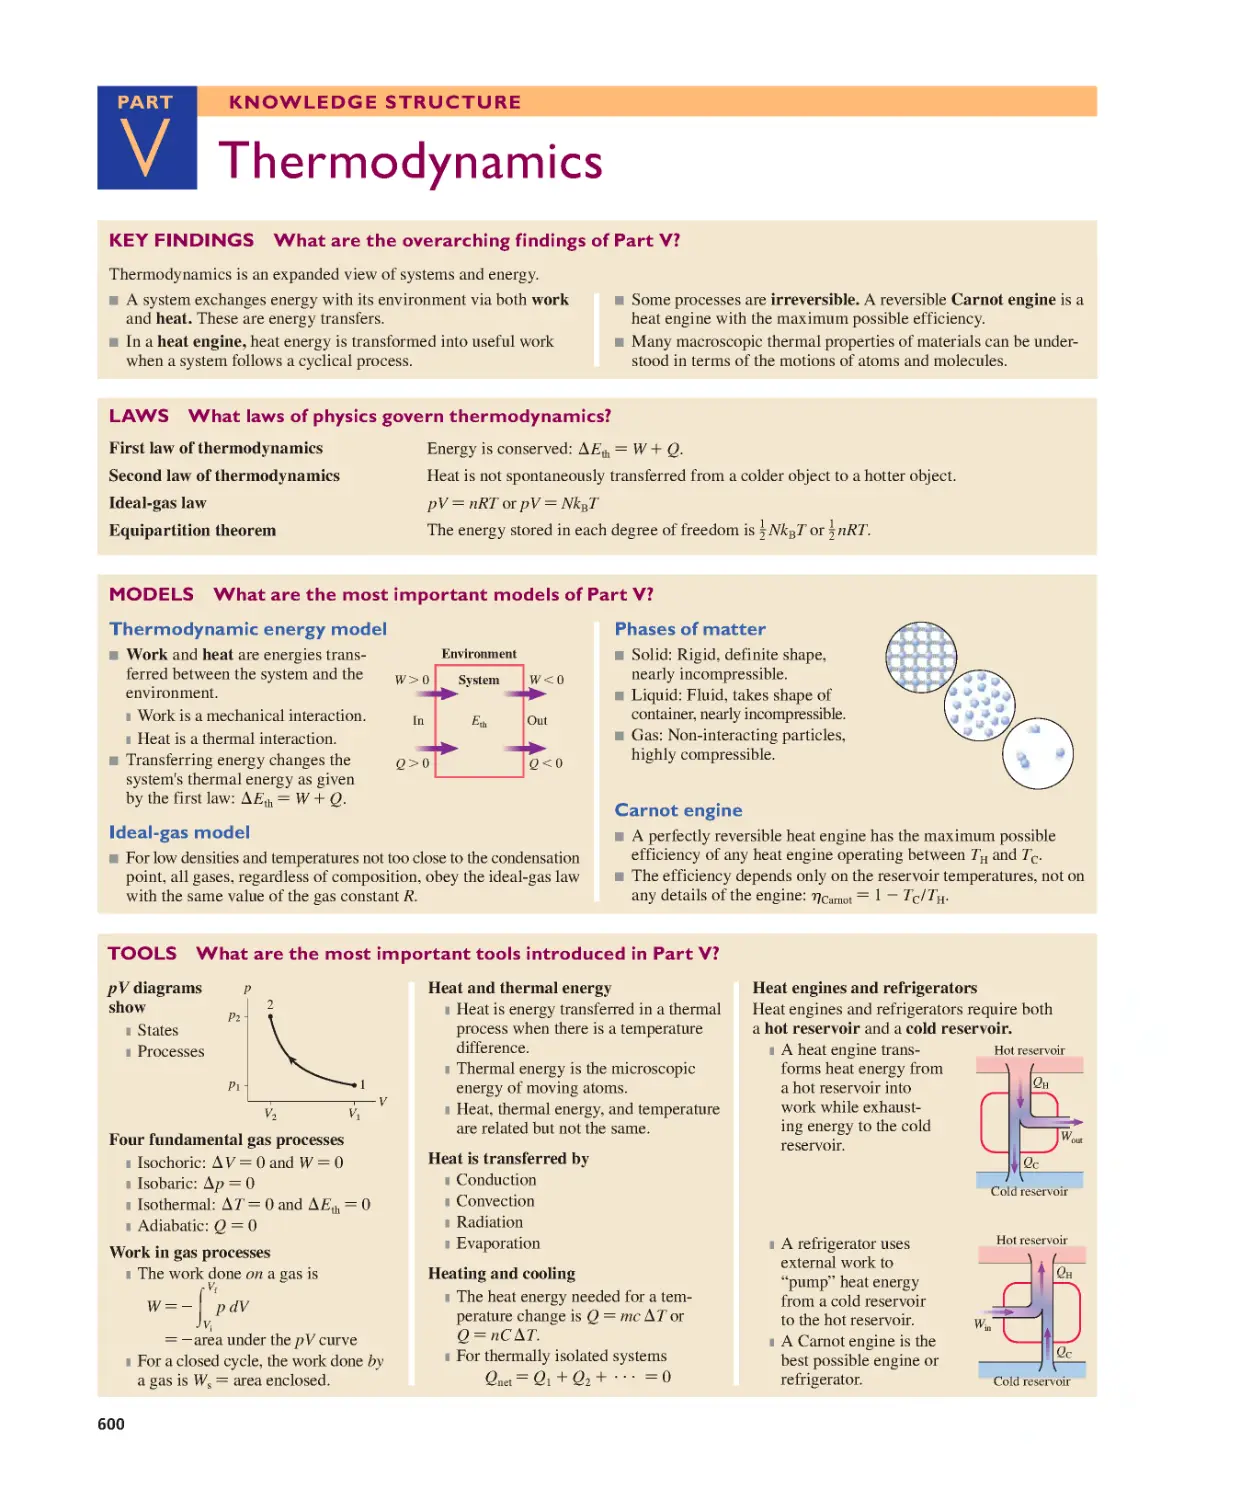 Part V: Knowledge Structure: Thermodynamics